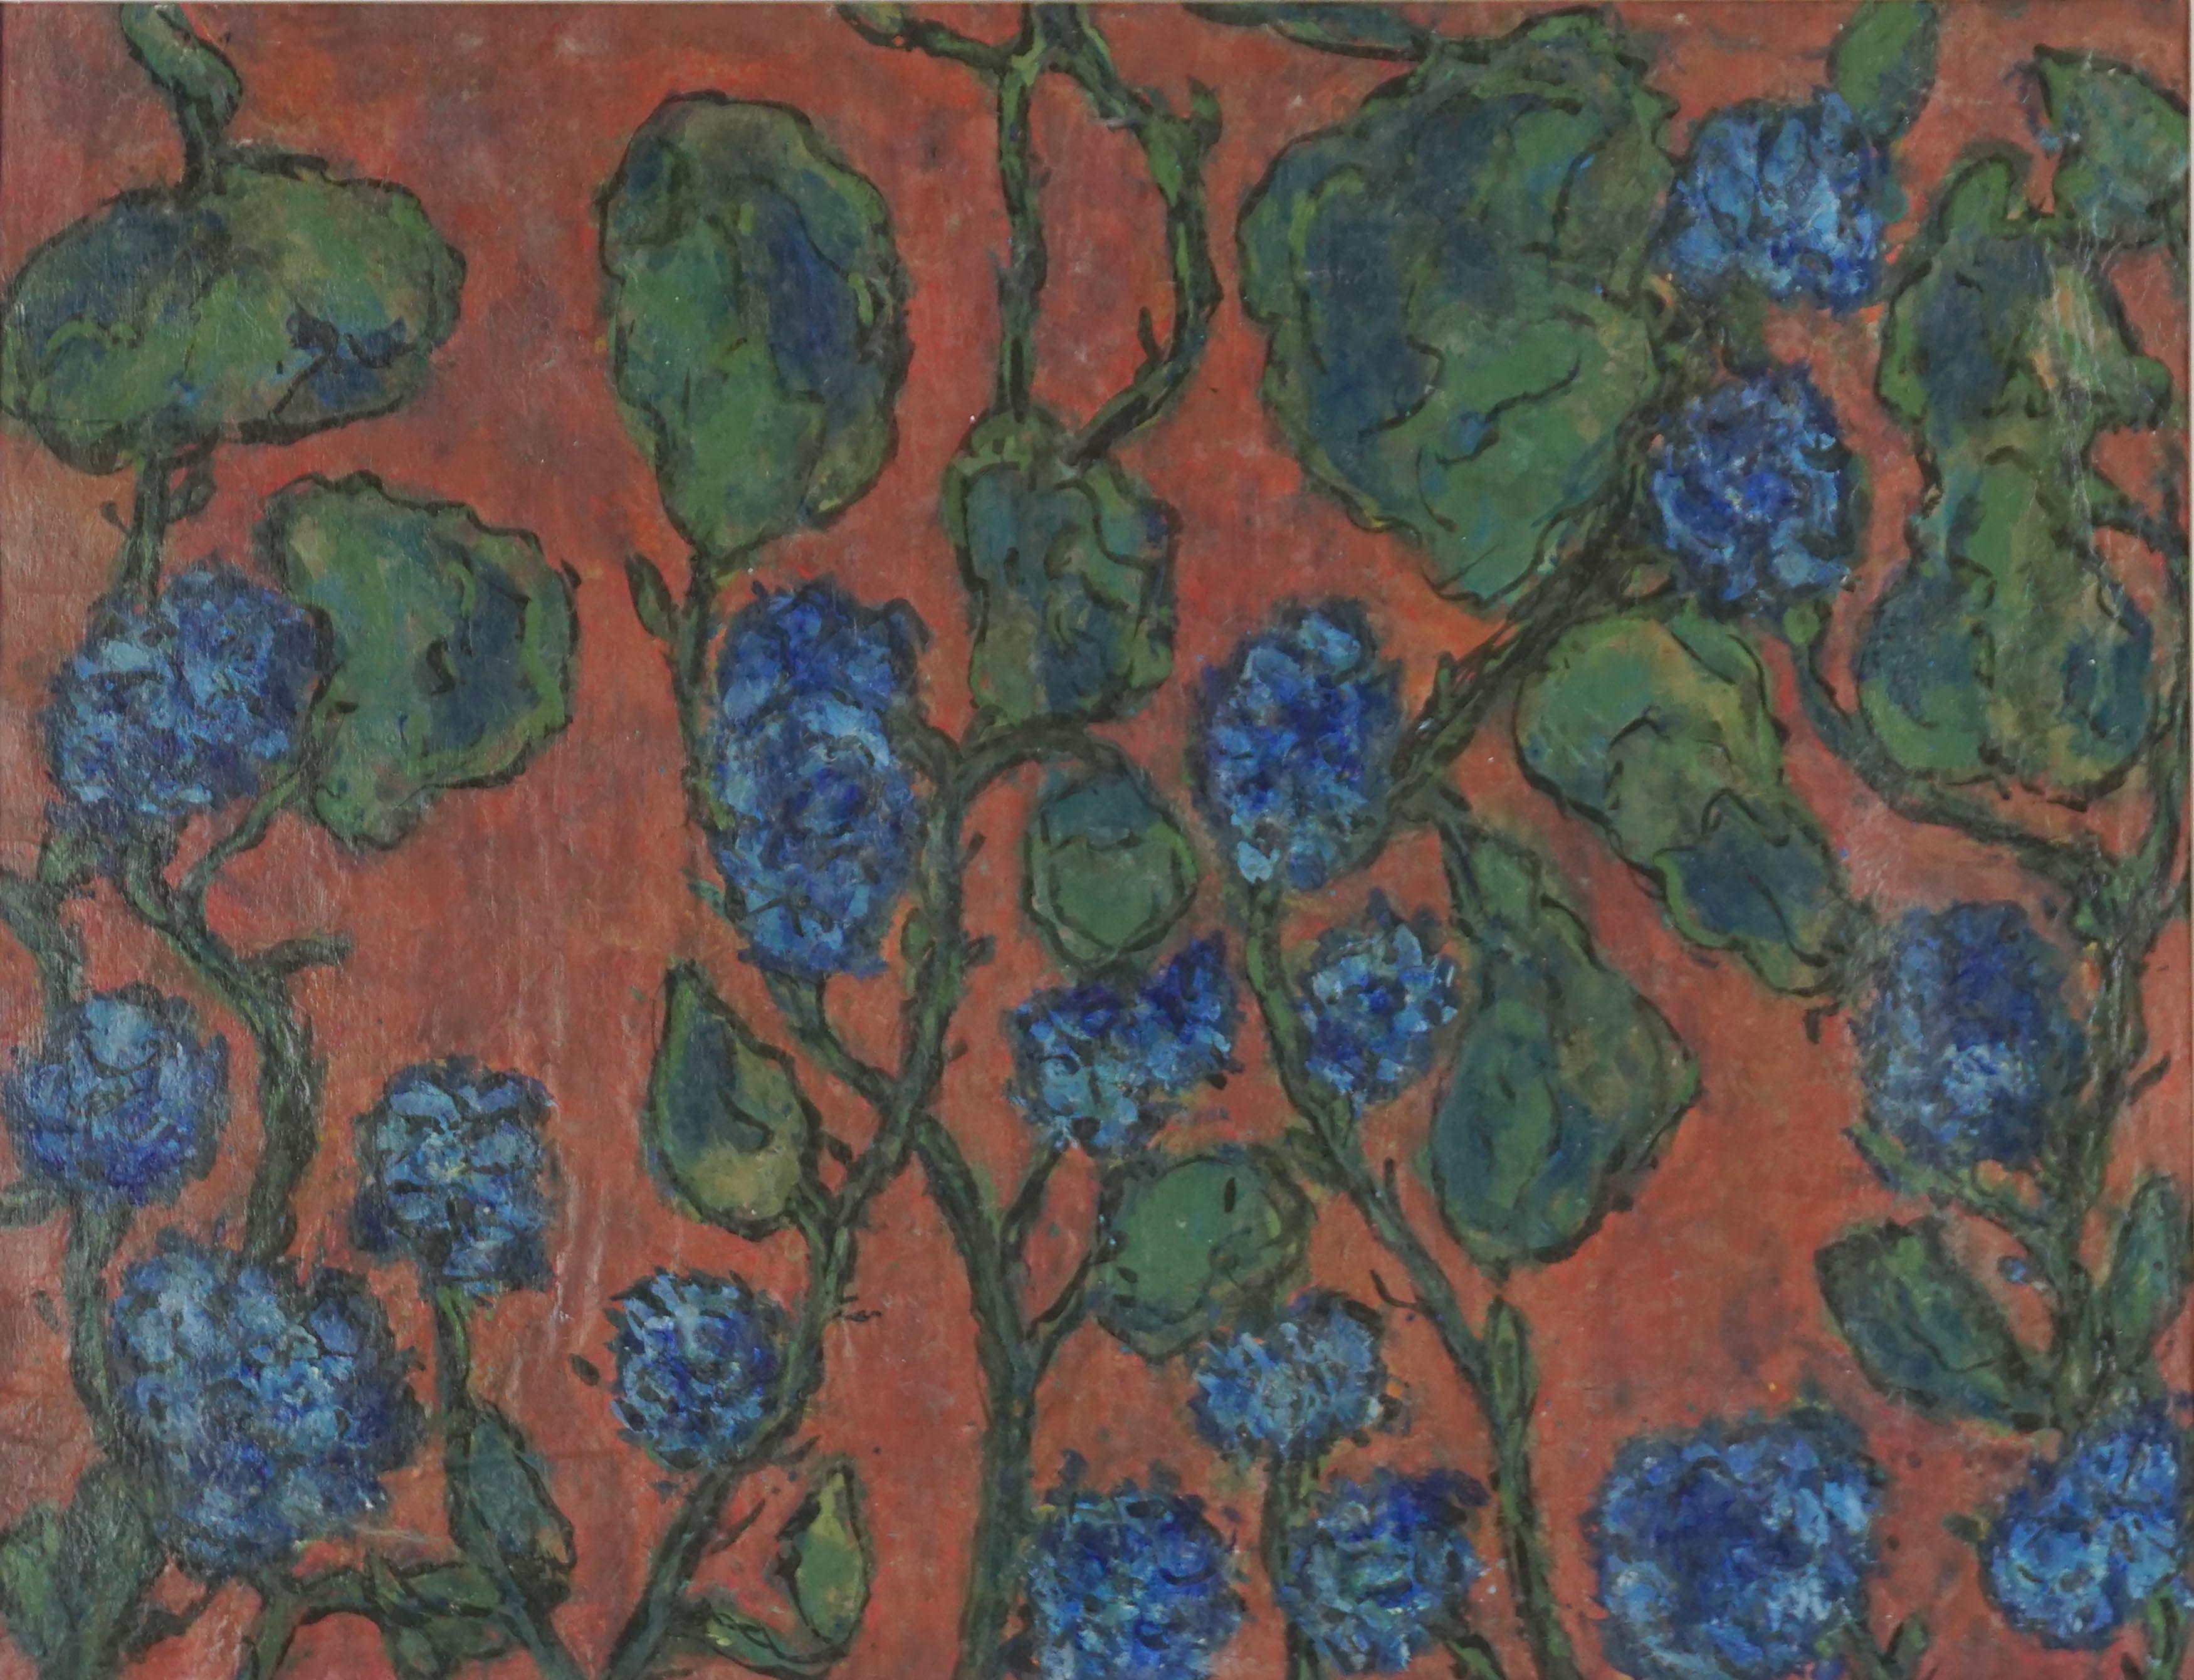 Mid Century Bay Area Abstract Expressionist Blue Hydrangeas in Acrylic on Paper

Vining Blue Hydrangeas by San Francisco's artist Honora Berg (American, 1897-1985), 1946. The vertical vines and the splashes of blue flowers adds movement and interest